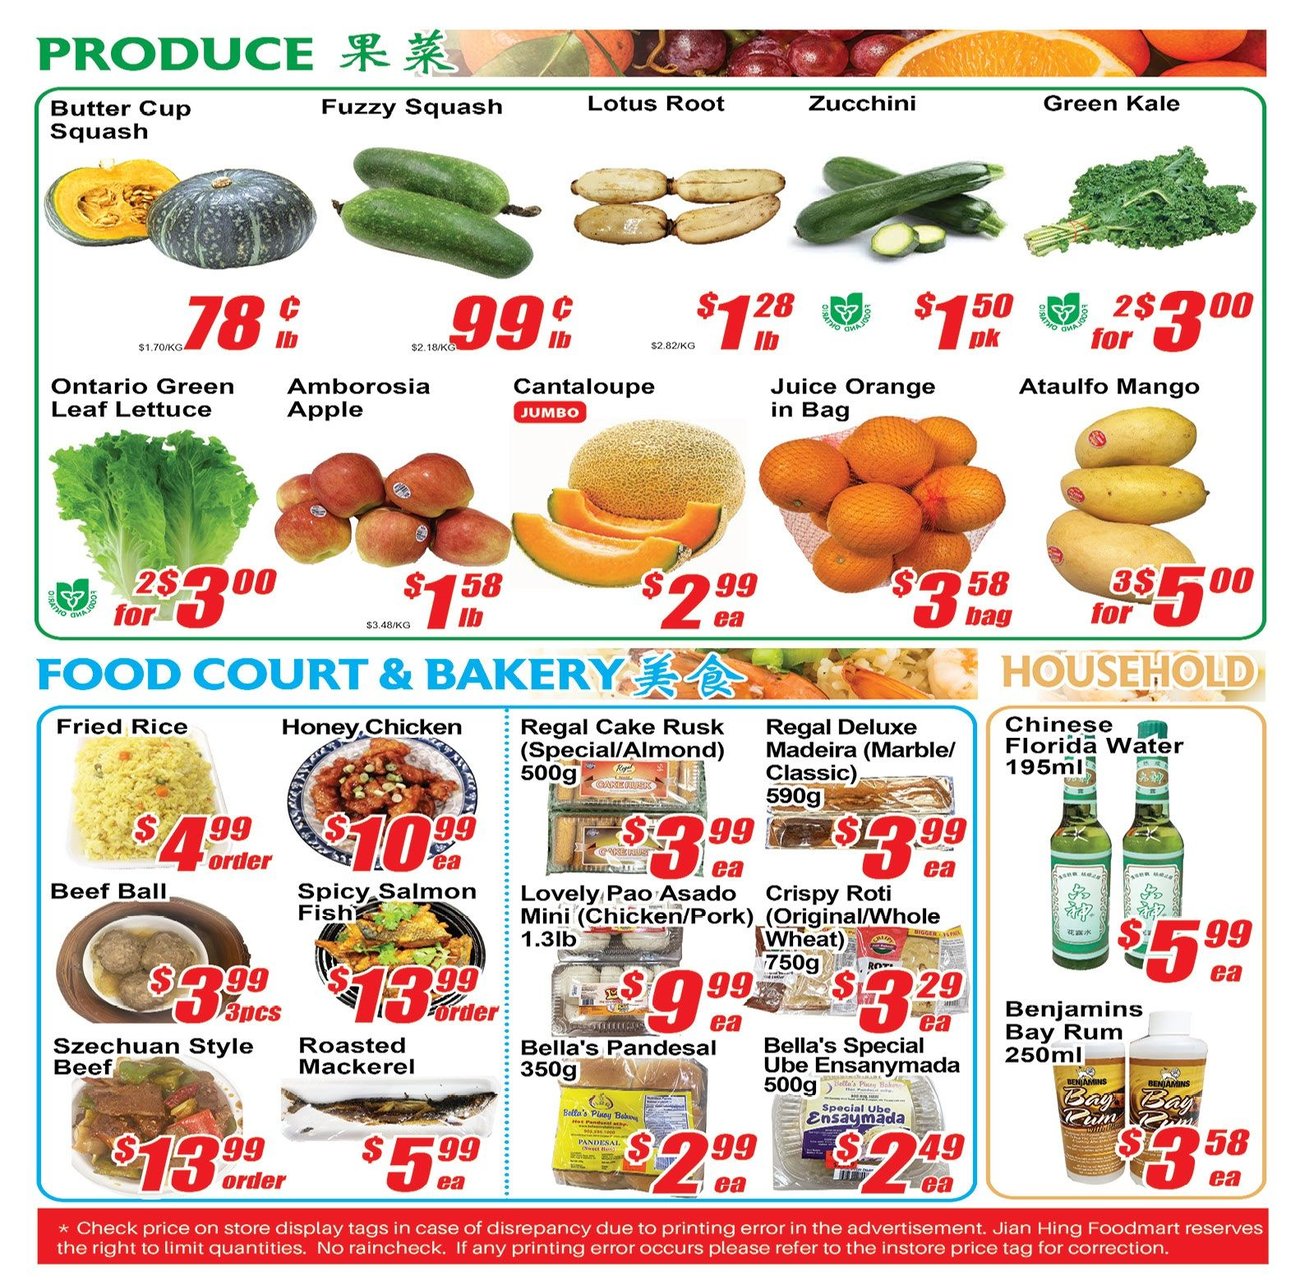 Jian Hing Supermarket - Scarborough Store - Weekly Flyer Specials - Page 4